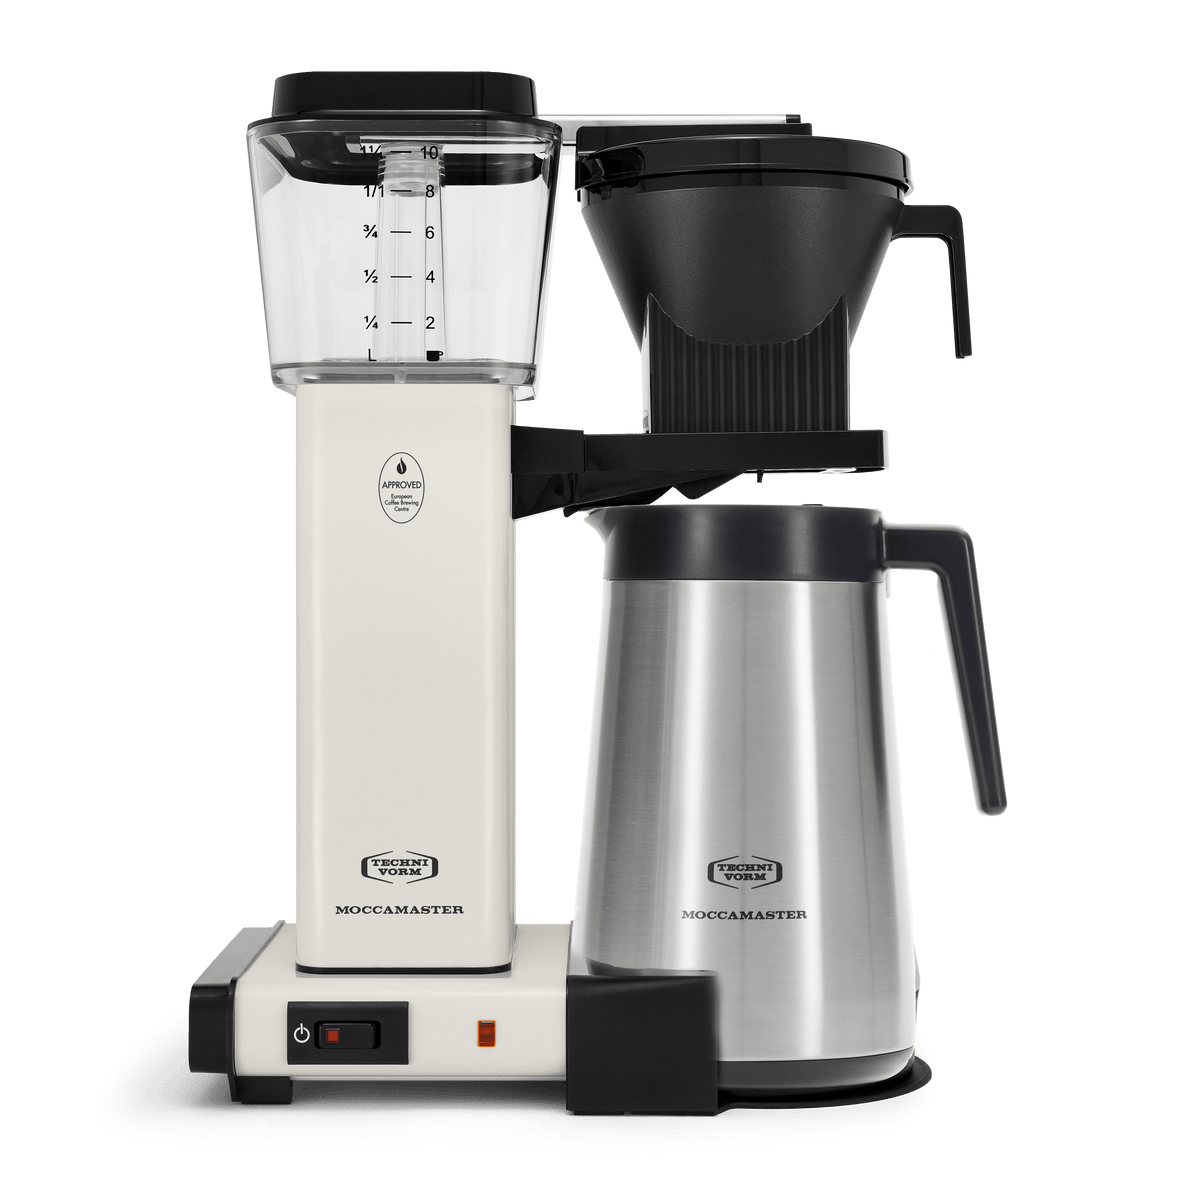 Front shot showing Moccamaster KBGT in Off-White, with rectangular tower and base, clear acrylic water reservoir with fill level marks, power and switch, stainless steel thermal carafe with black handle, and black automatic brew basket.  